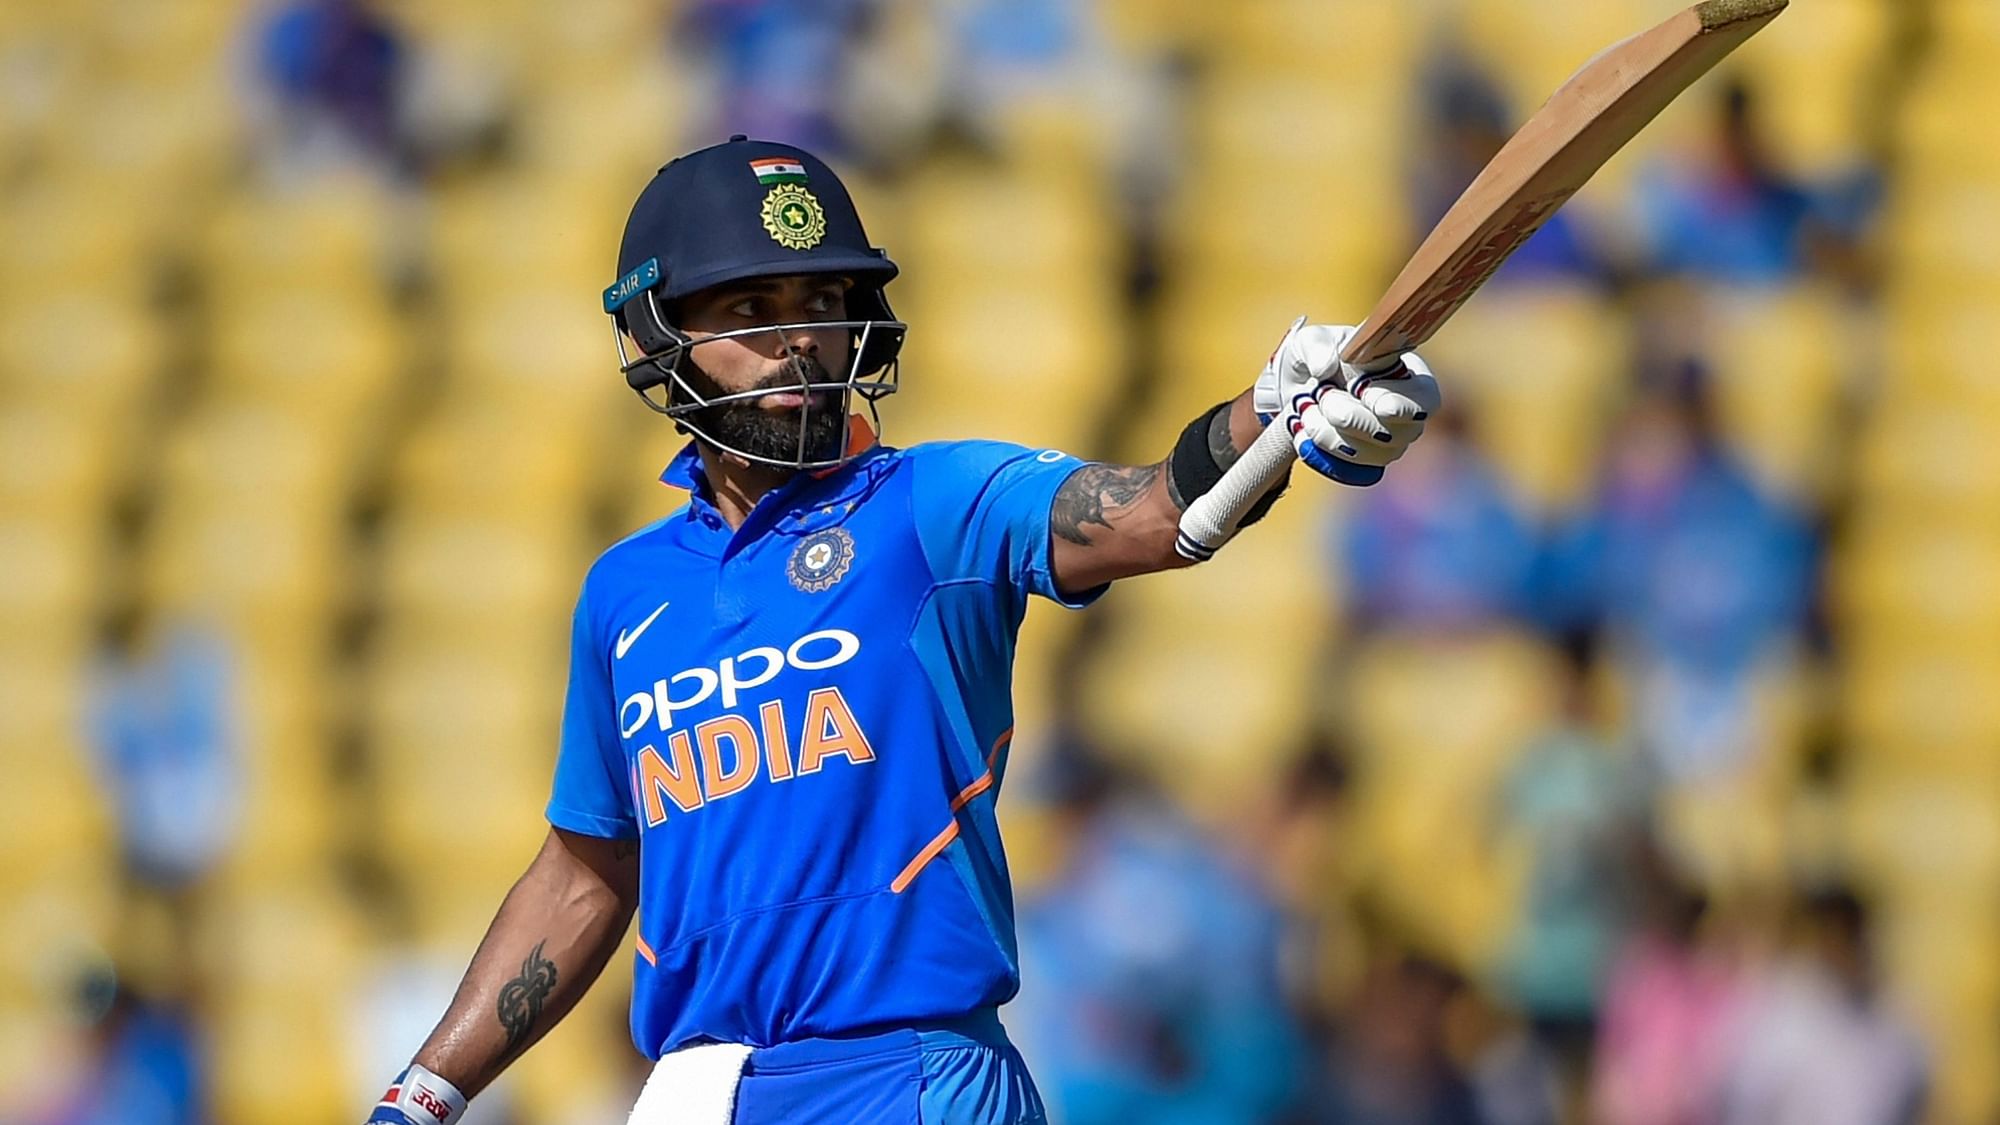 India vs Australia LIVE Cricket Score Streaming and Ball by Ball ball score coverage online, IND vs AUS 2nd ODI tv telecast on DD Sports, Sony Six, Star Sports